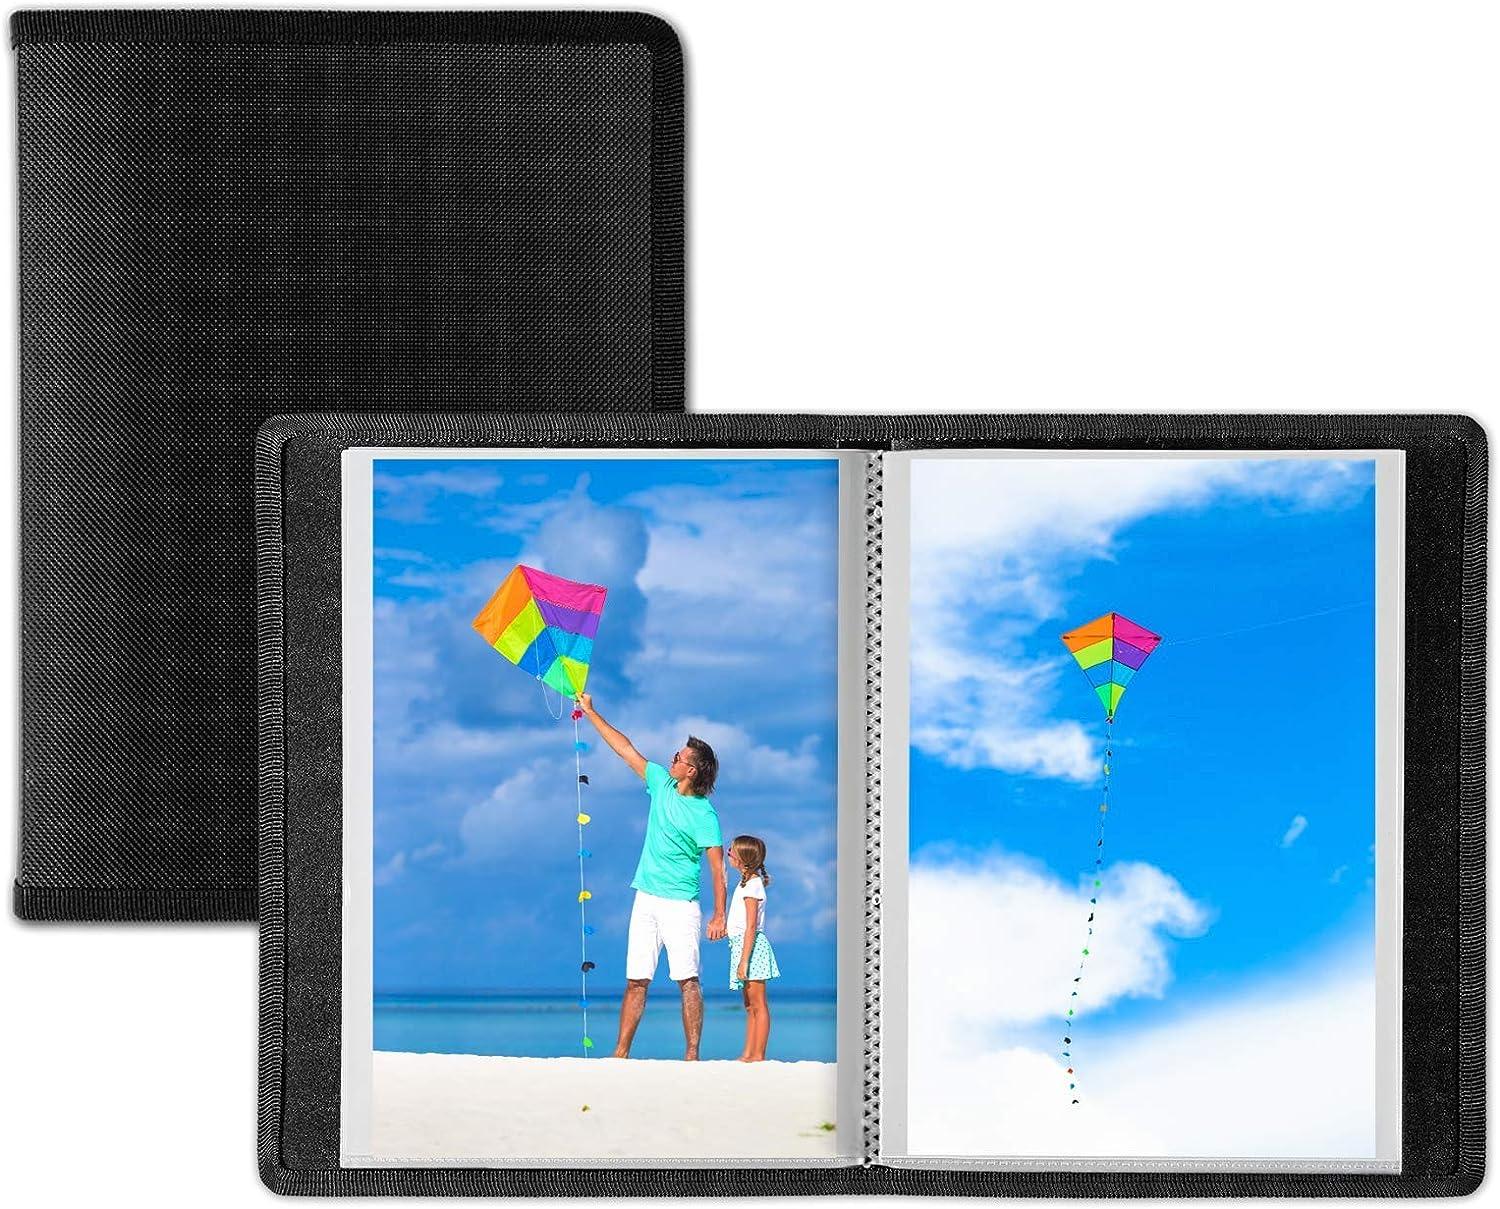 Dunwell Small Photo Albums 4x6 - (2 Pack, Black), Flexible Cover, Portfolio Binder with 24 Sleeves, Holds 48 6x4 Photos, Artwork or Postcards, Mini